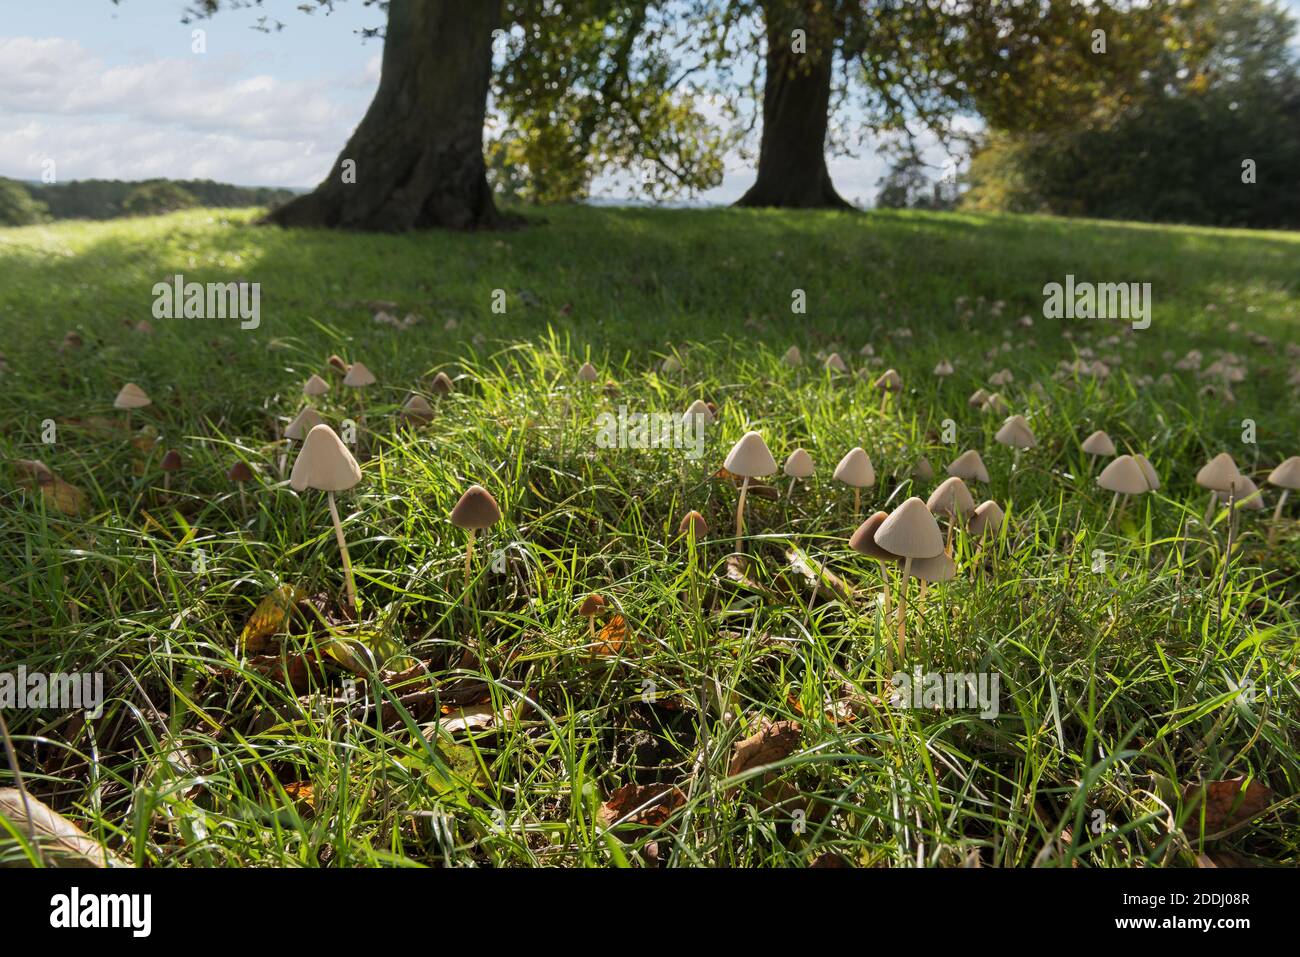 Milky white dunce cap Conocybe lactea patch of fungi mushroom in grazed meadow grass by sheep  beneath horse chestnut tree in early morning Stock Photo